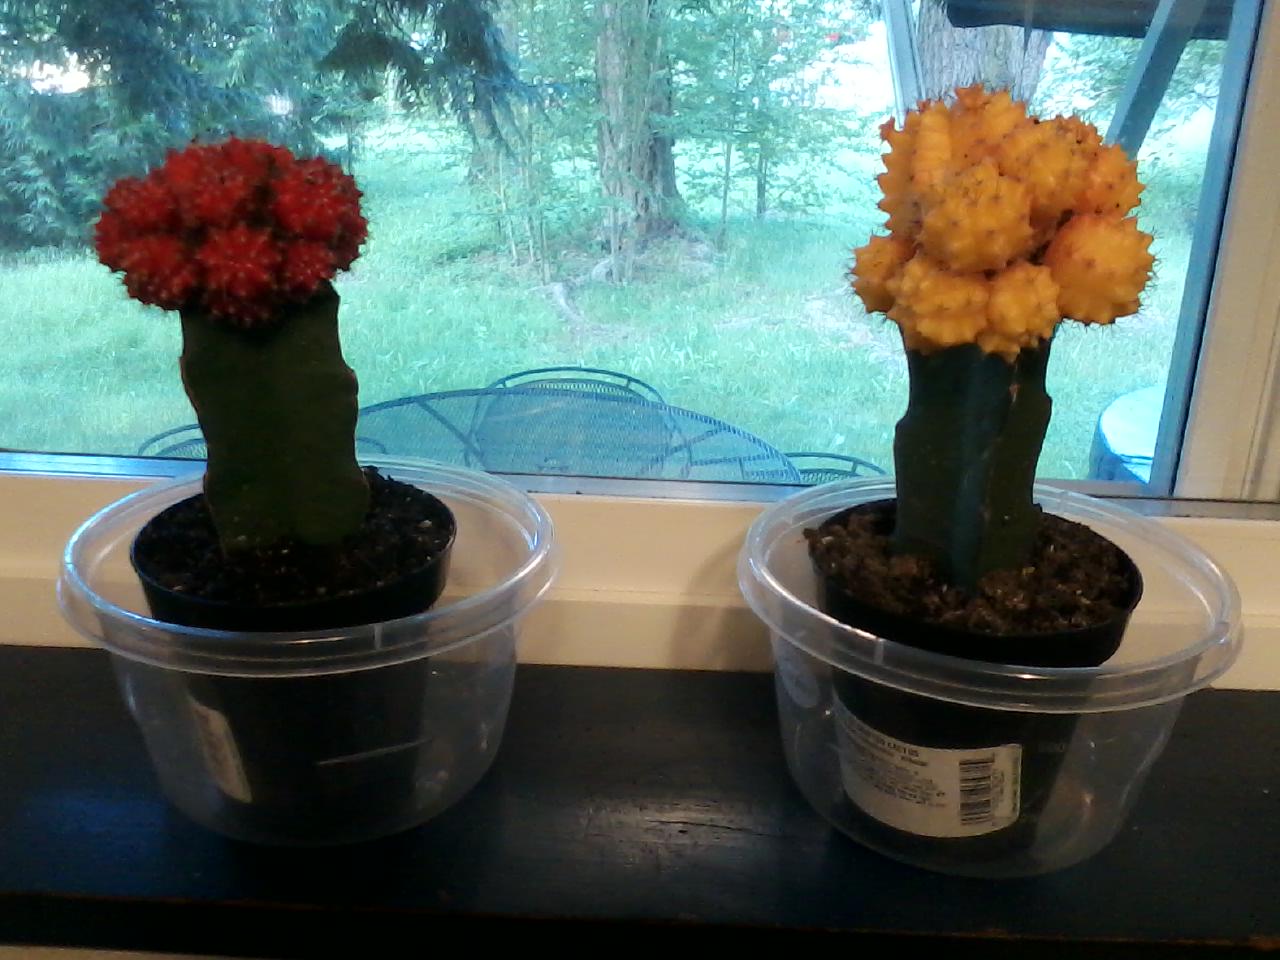 My cool yellow and red moon cactuses :)